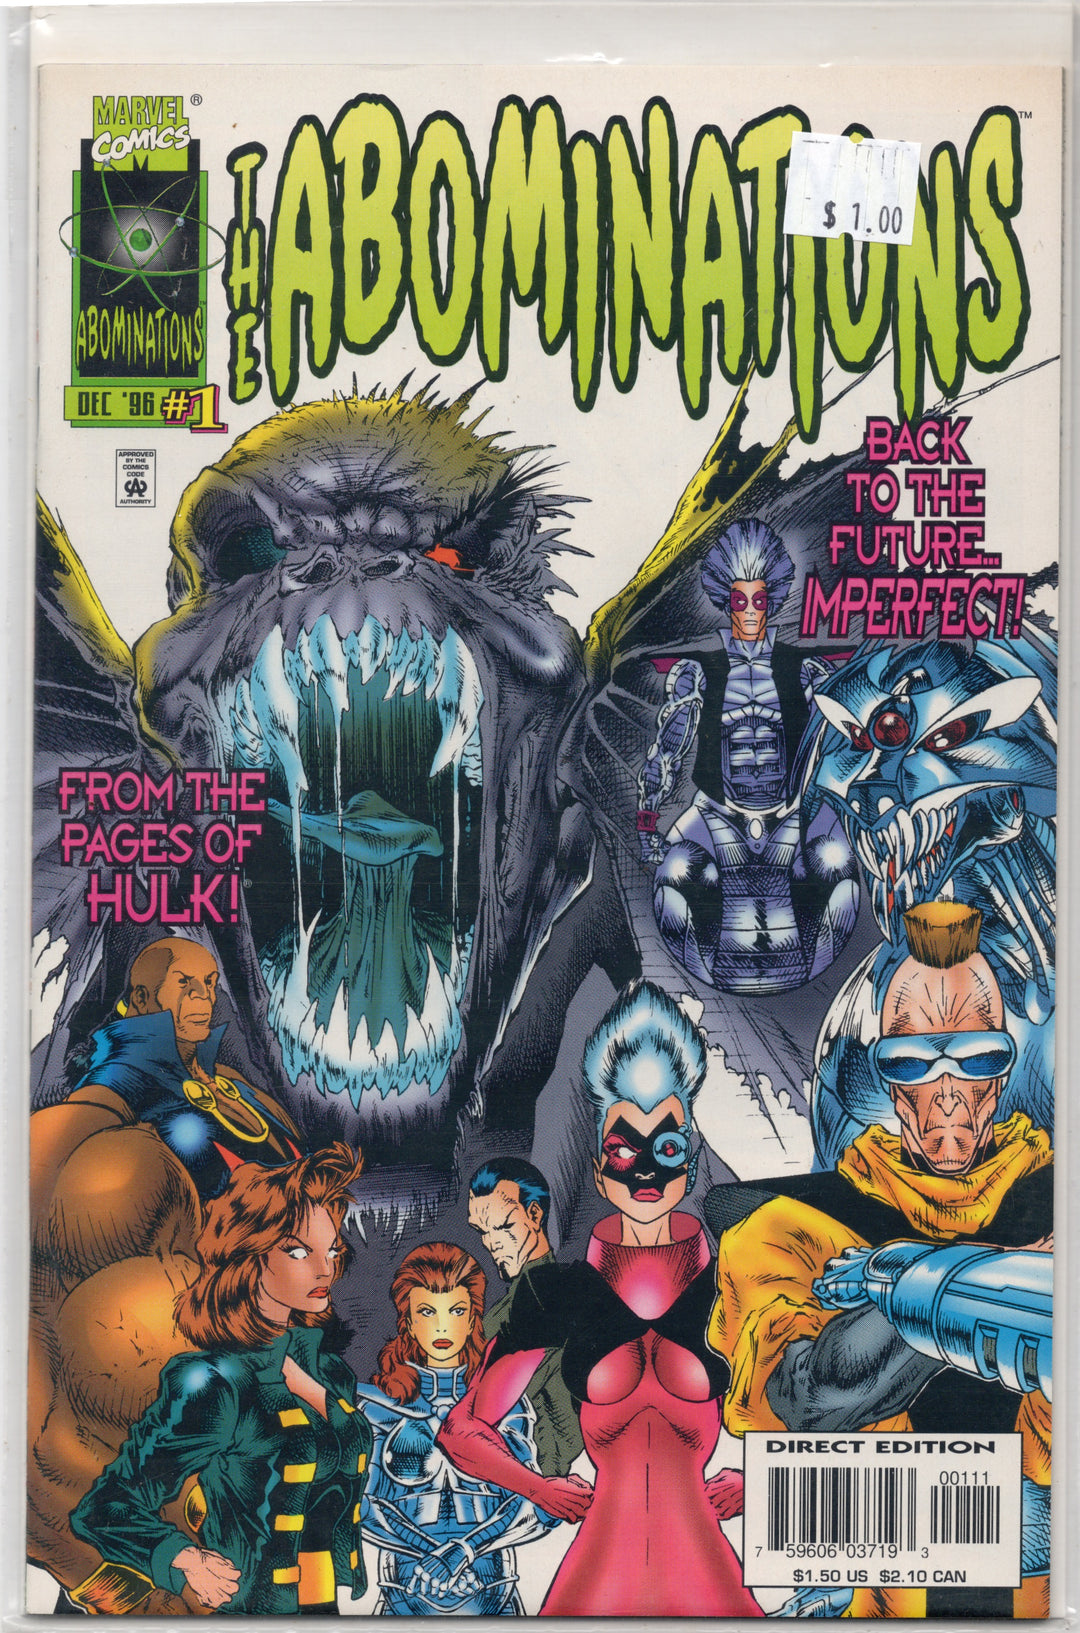 The Abominations #1